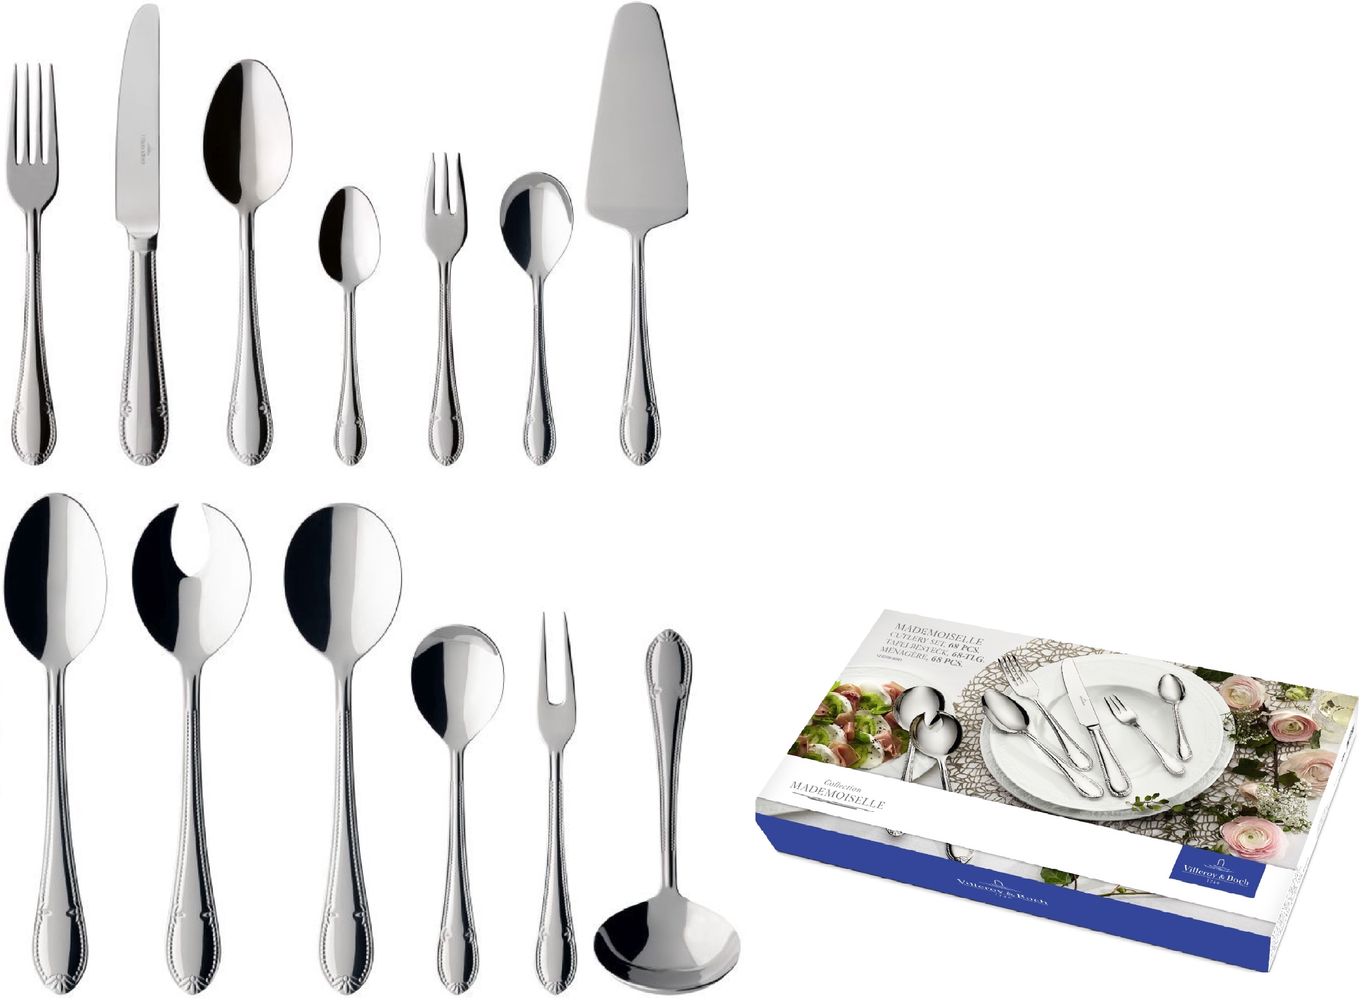 Manuscript beetje oud Villeroy and Boch 68-Piece Cutlery Set Mademoiselle | Buy now at Cookinglife